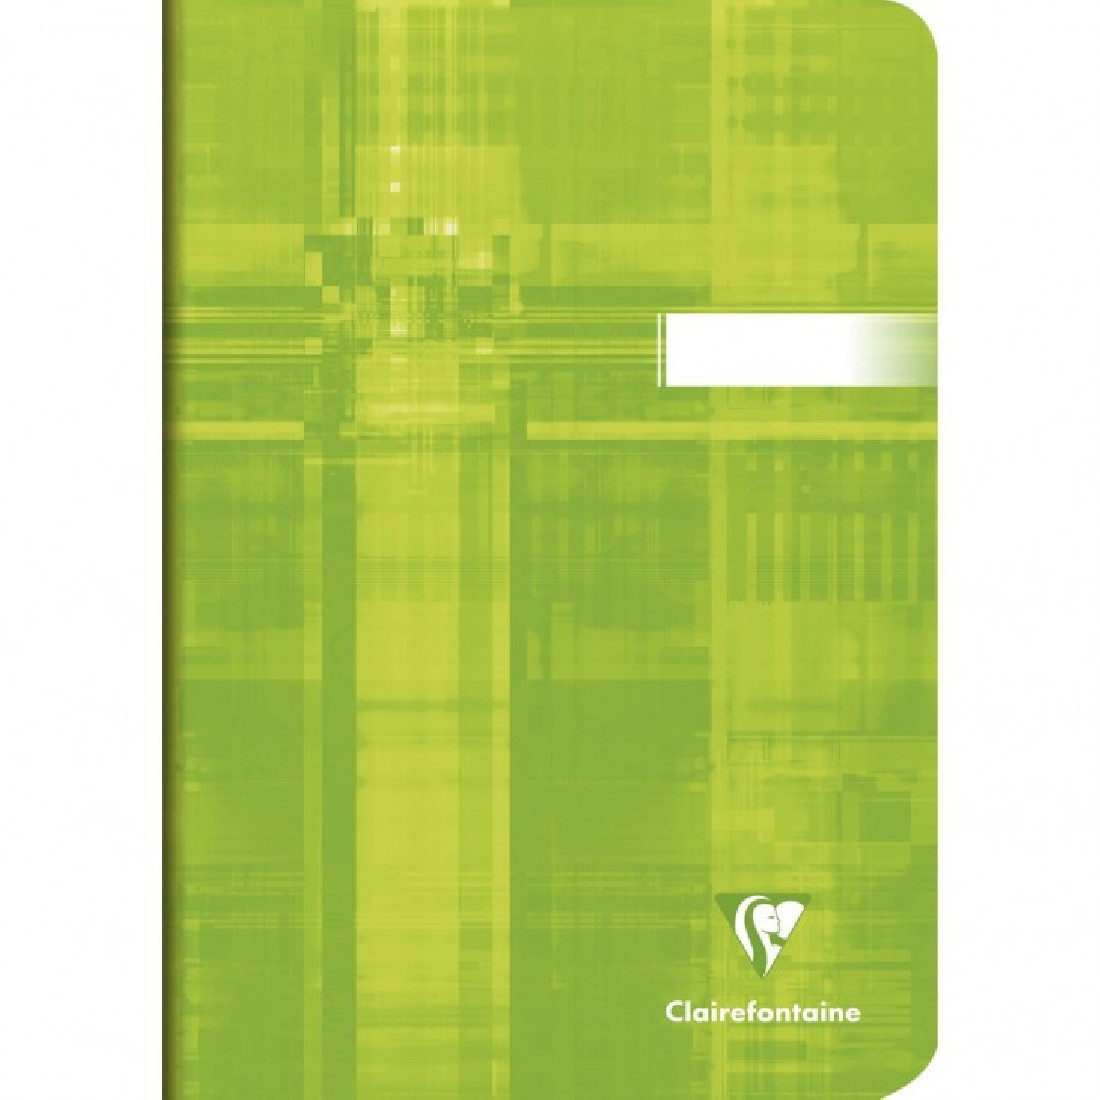 Clairefontaine Rhodia notebook A5 14,8x21 cm, lined, white paper 90 gr, 96 pages,  63686c Green